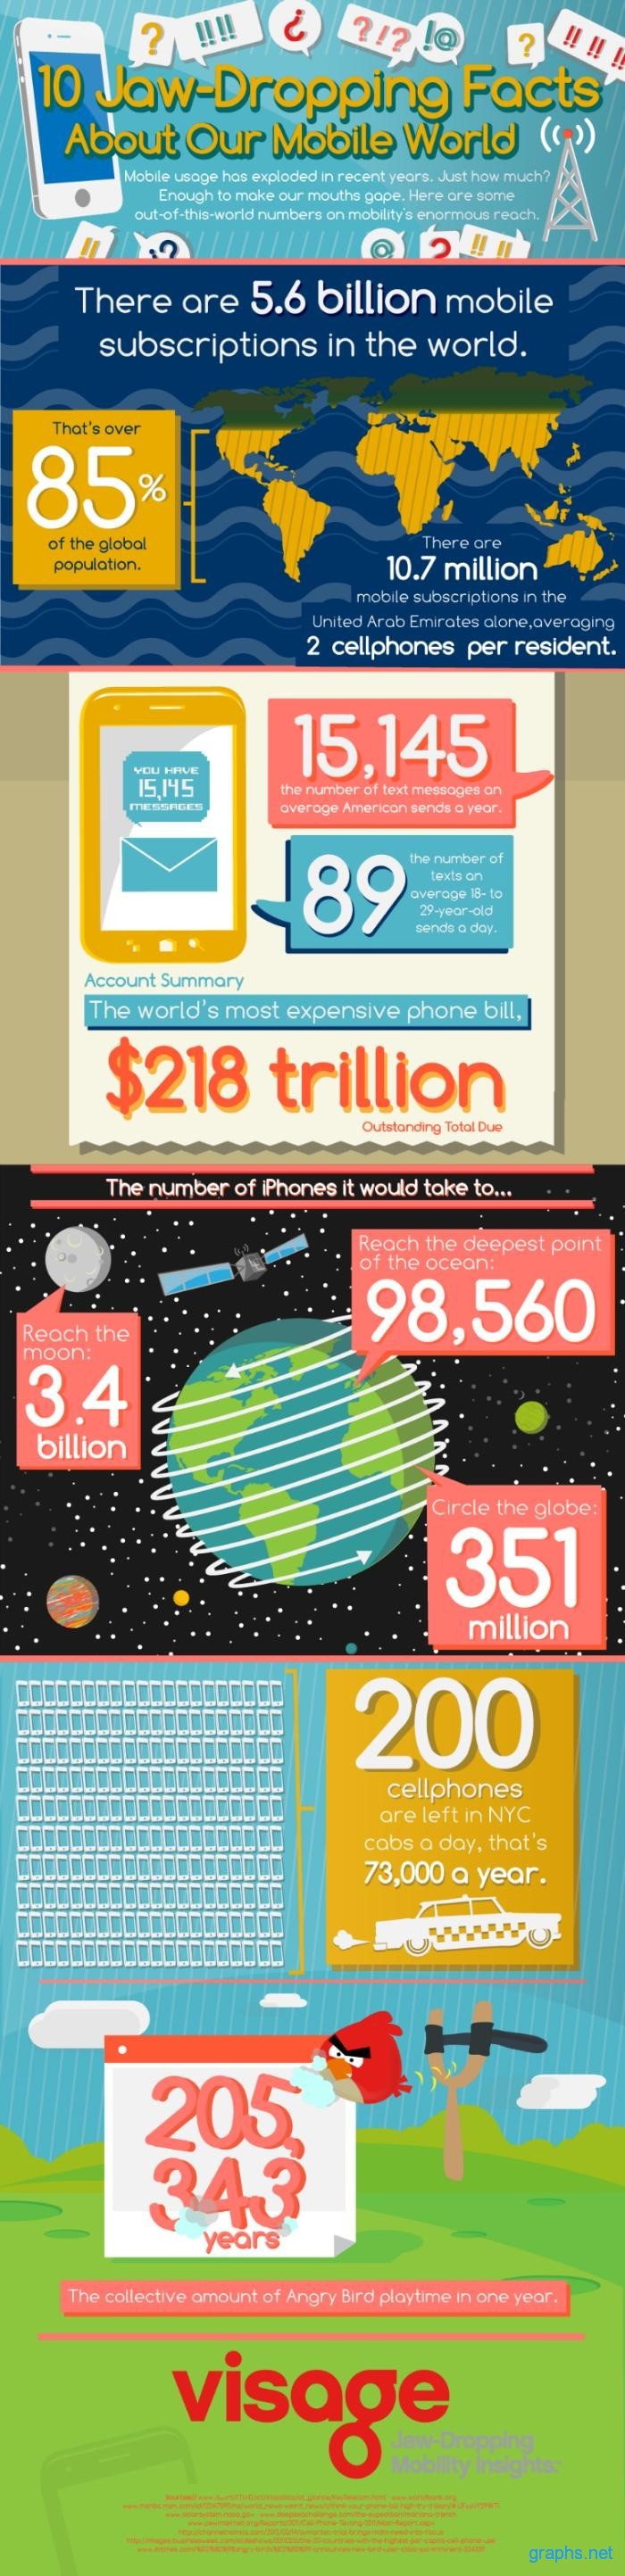 10 Most Interesting Facts About Mobile World